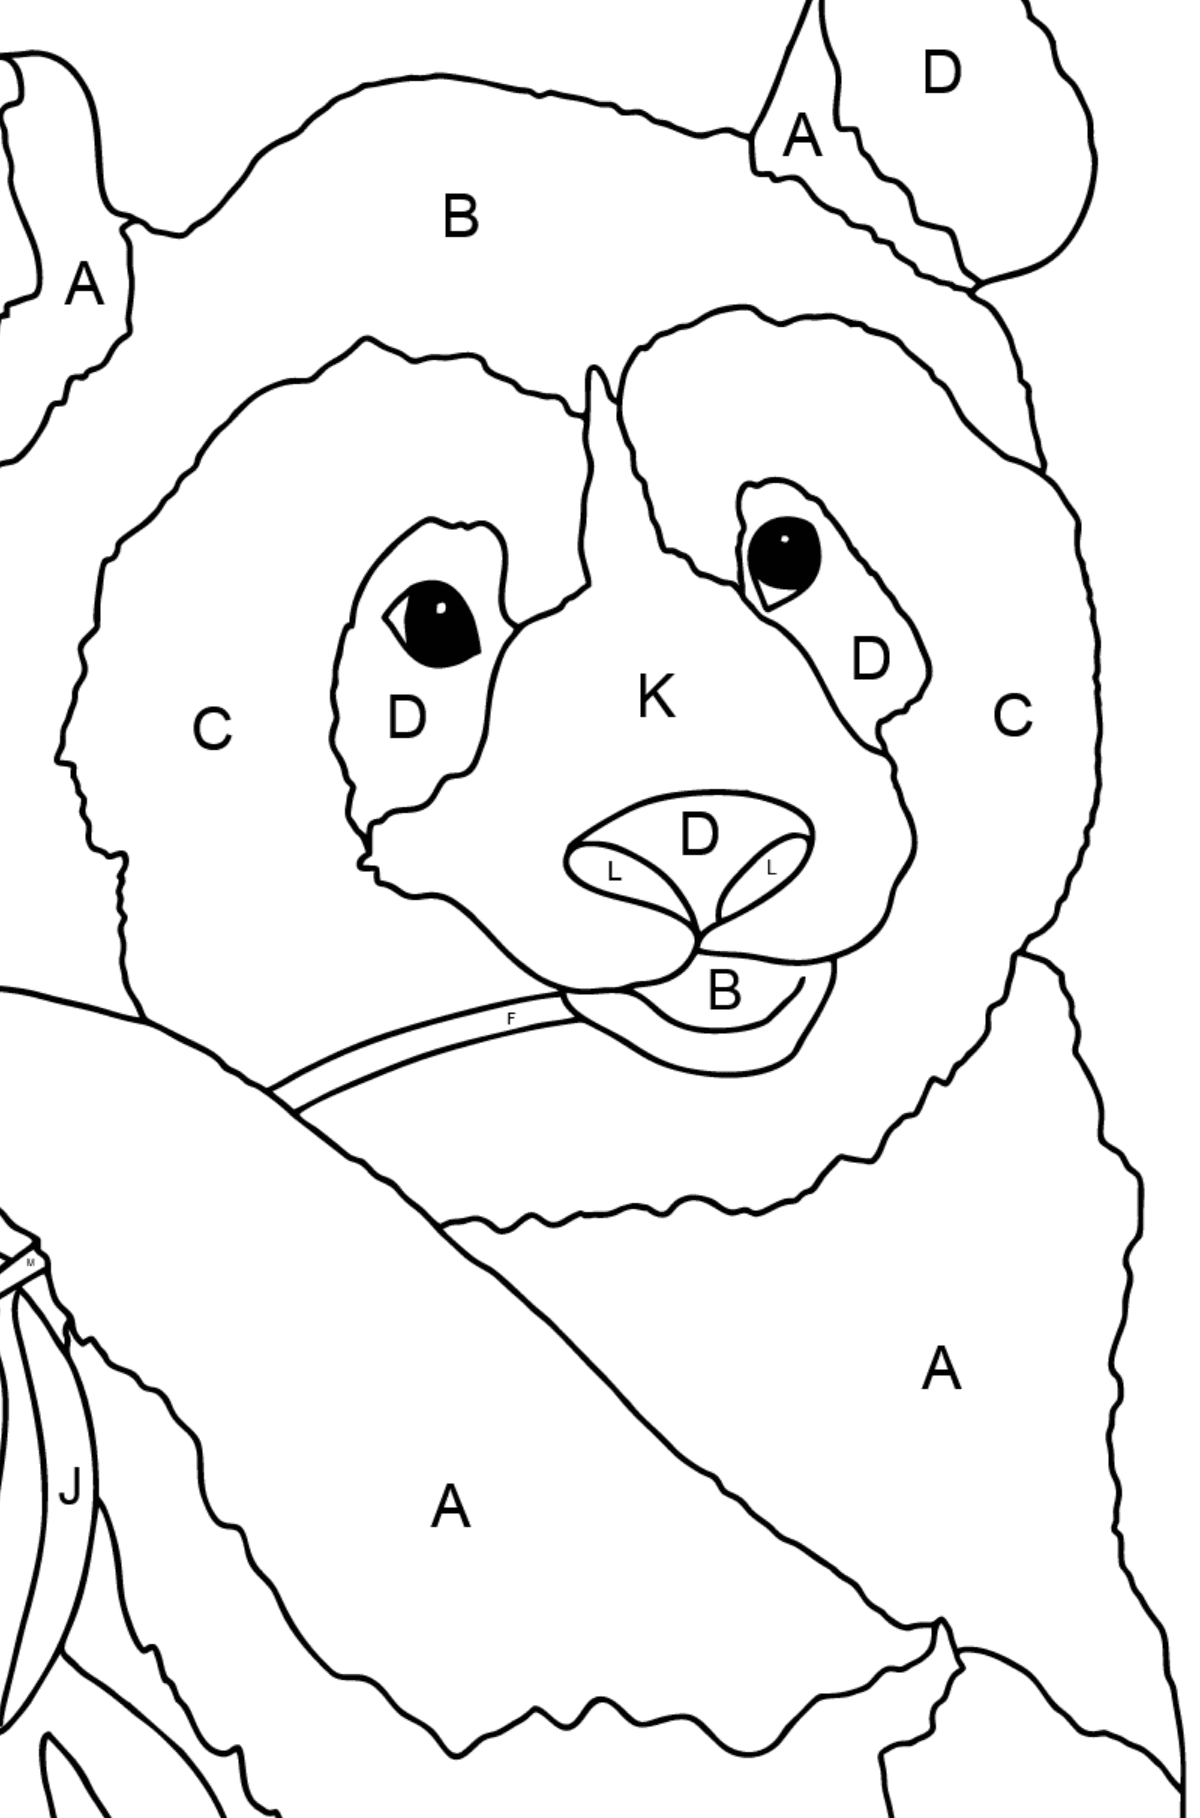 Coloring Page - A Panda is Eating Bamboo Stems and Leaves - Coloring by Letters for Children